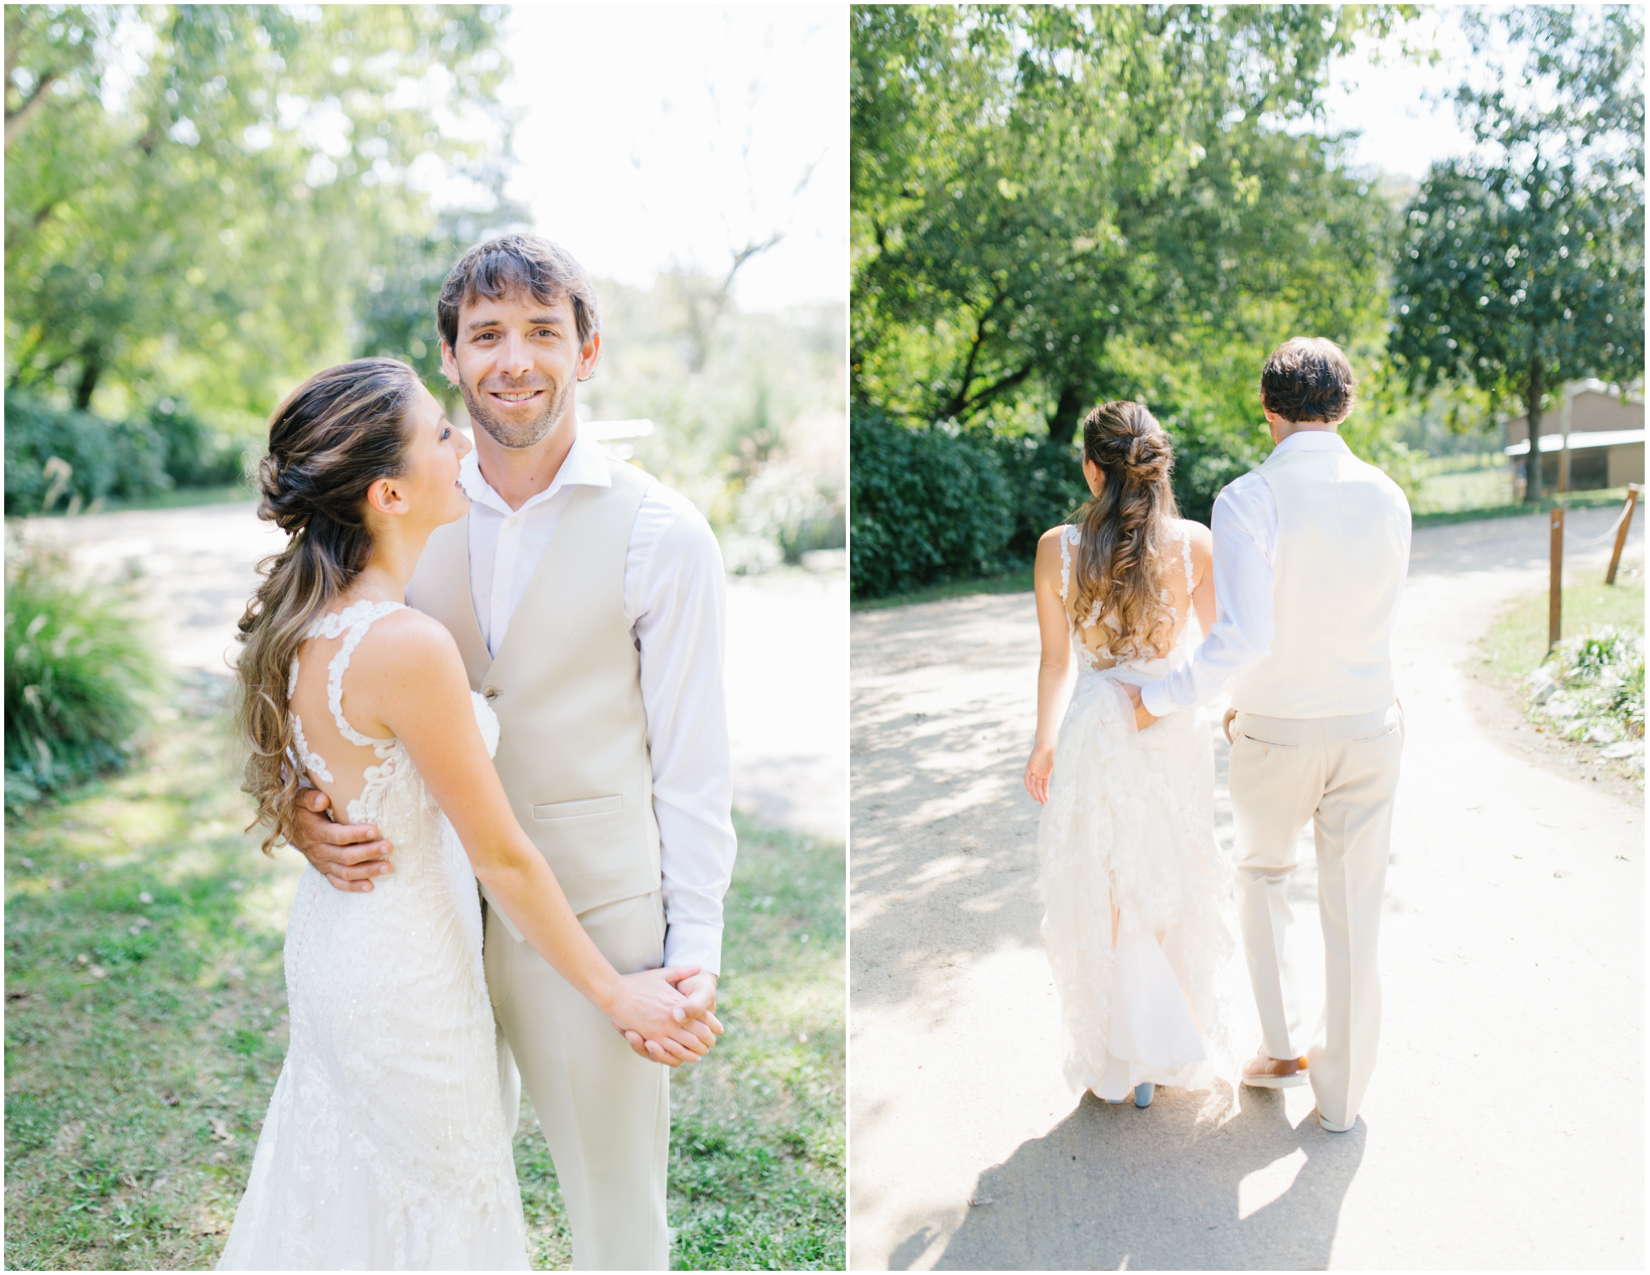 Tennessee River Place Wedding | Chattanooga, TN Wedding | Beautiful Wedding Details | Bride and Groom Portraits Wedding Day | Southern Bride | VSCO | Emma Rose Company.jpg